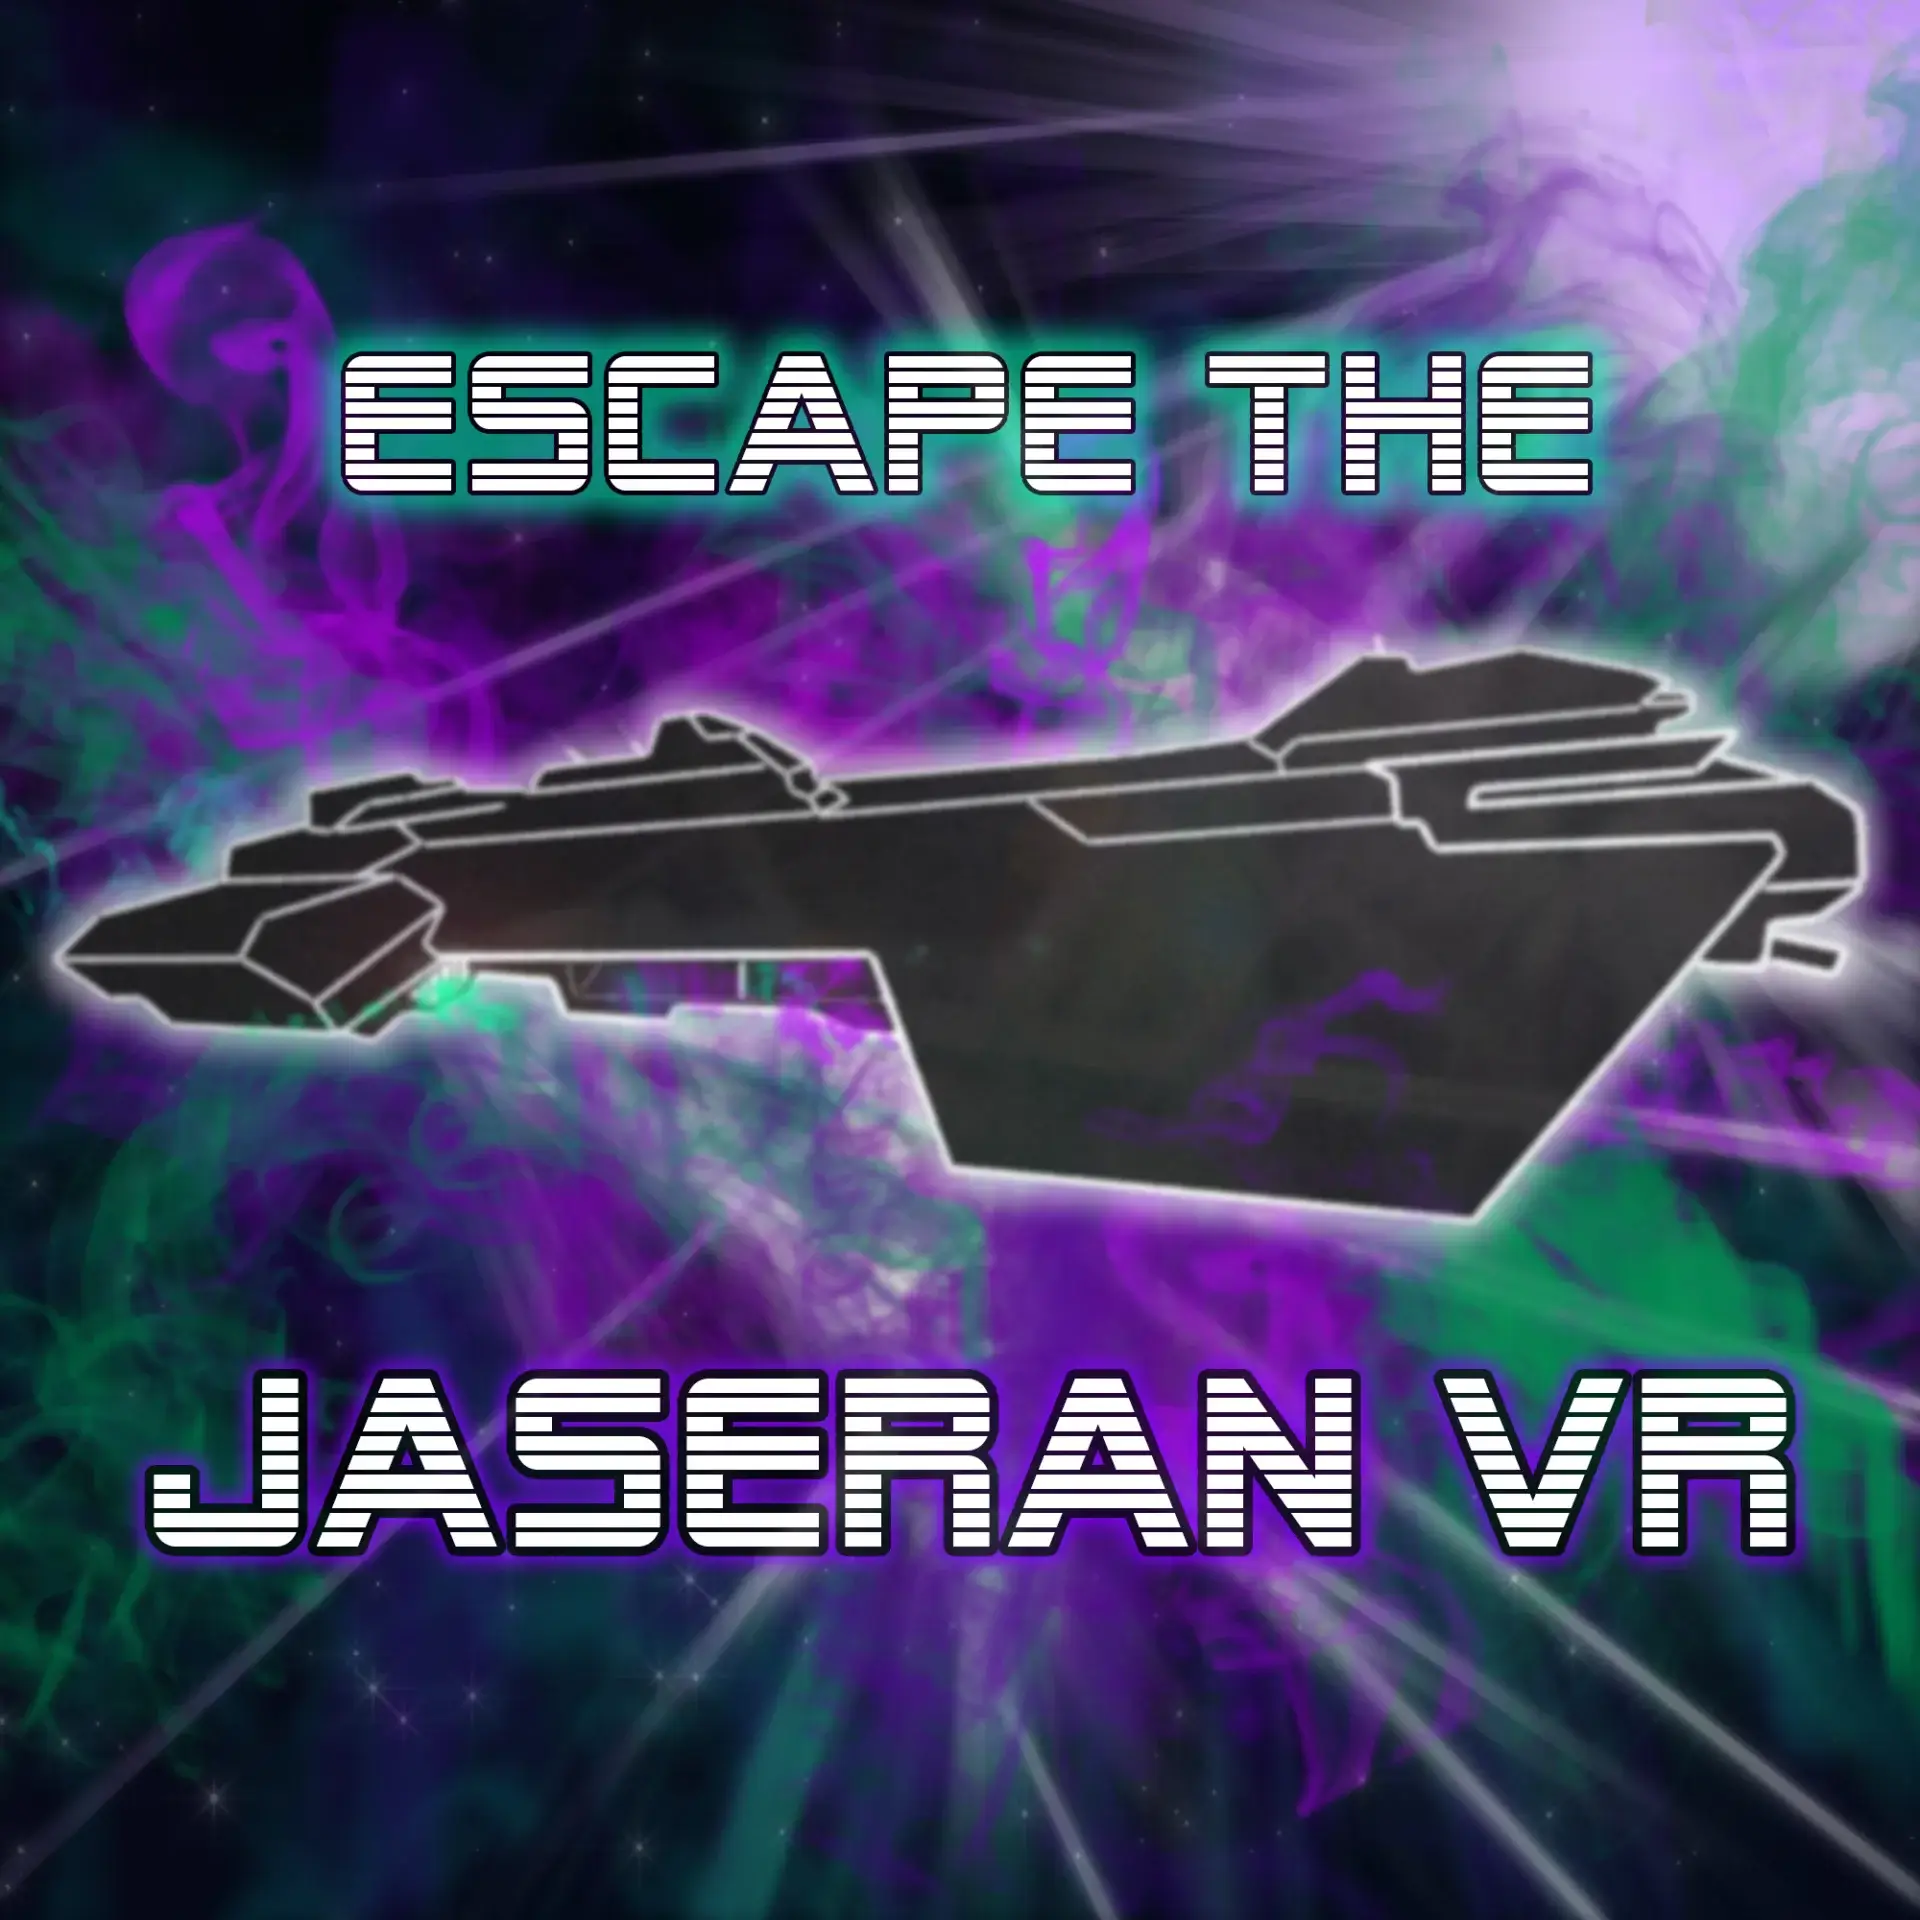 Logo for Project Jaseran Space Ship in interstellar space spewing teal green and purple gas and light